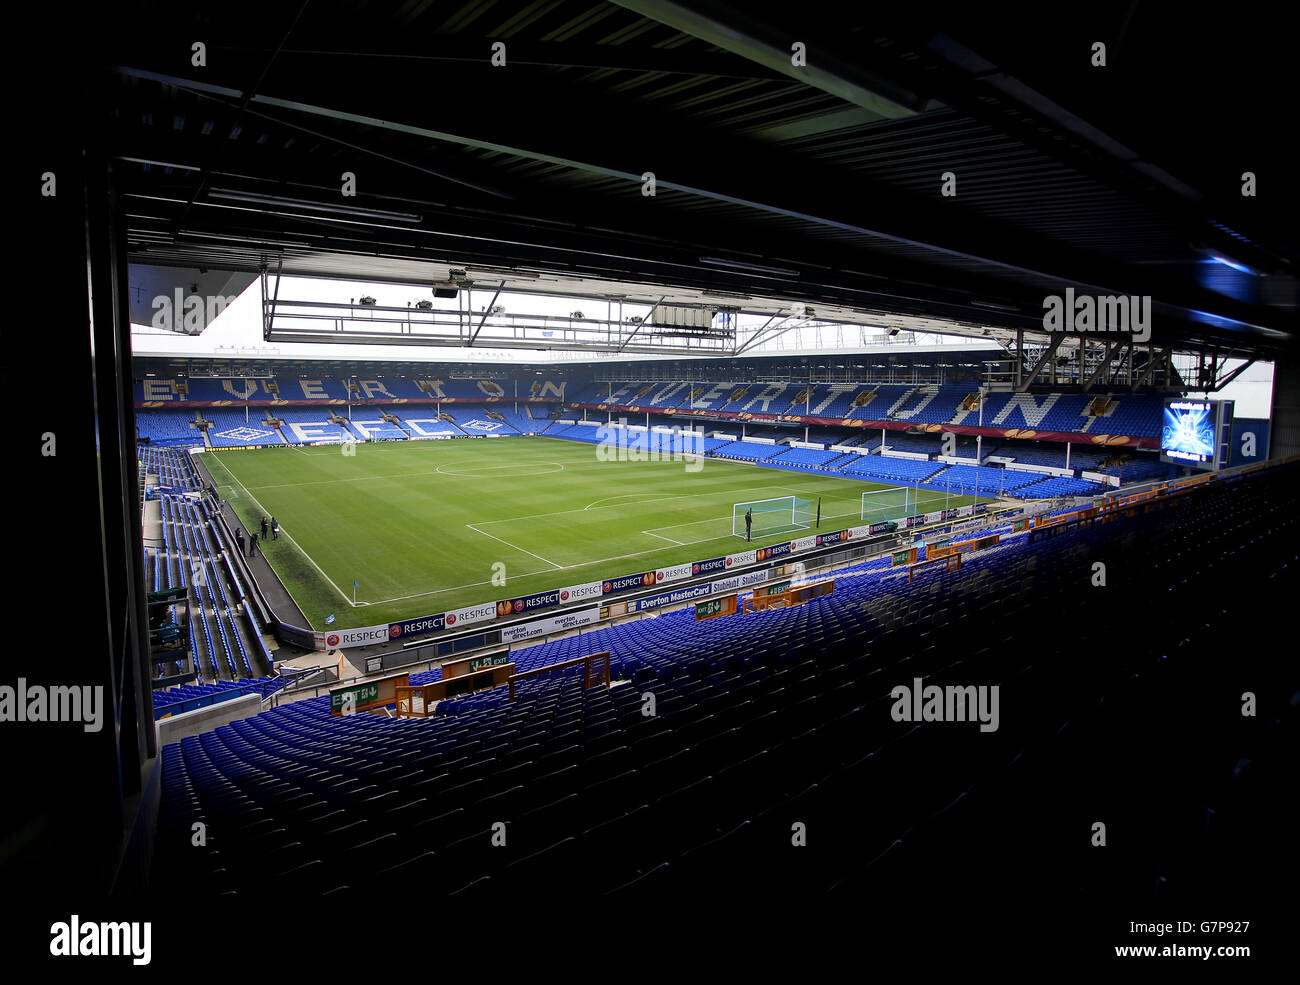 Soccer - UEFA Europa League - Round of 16 - First Leg - Everton v Dynamo Kiev - Goodison Park. General view of Goodison Park before the game Stock Photo